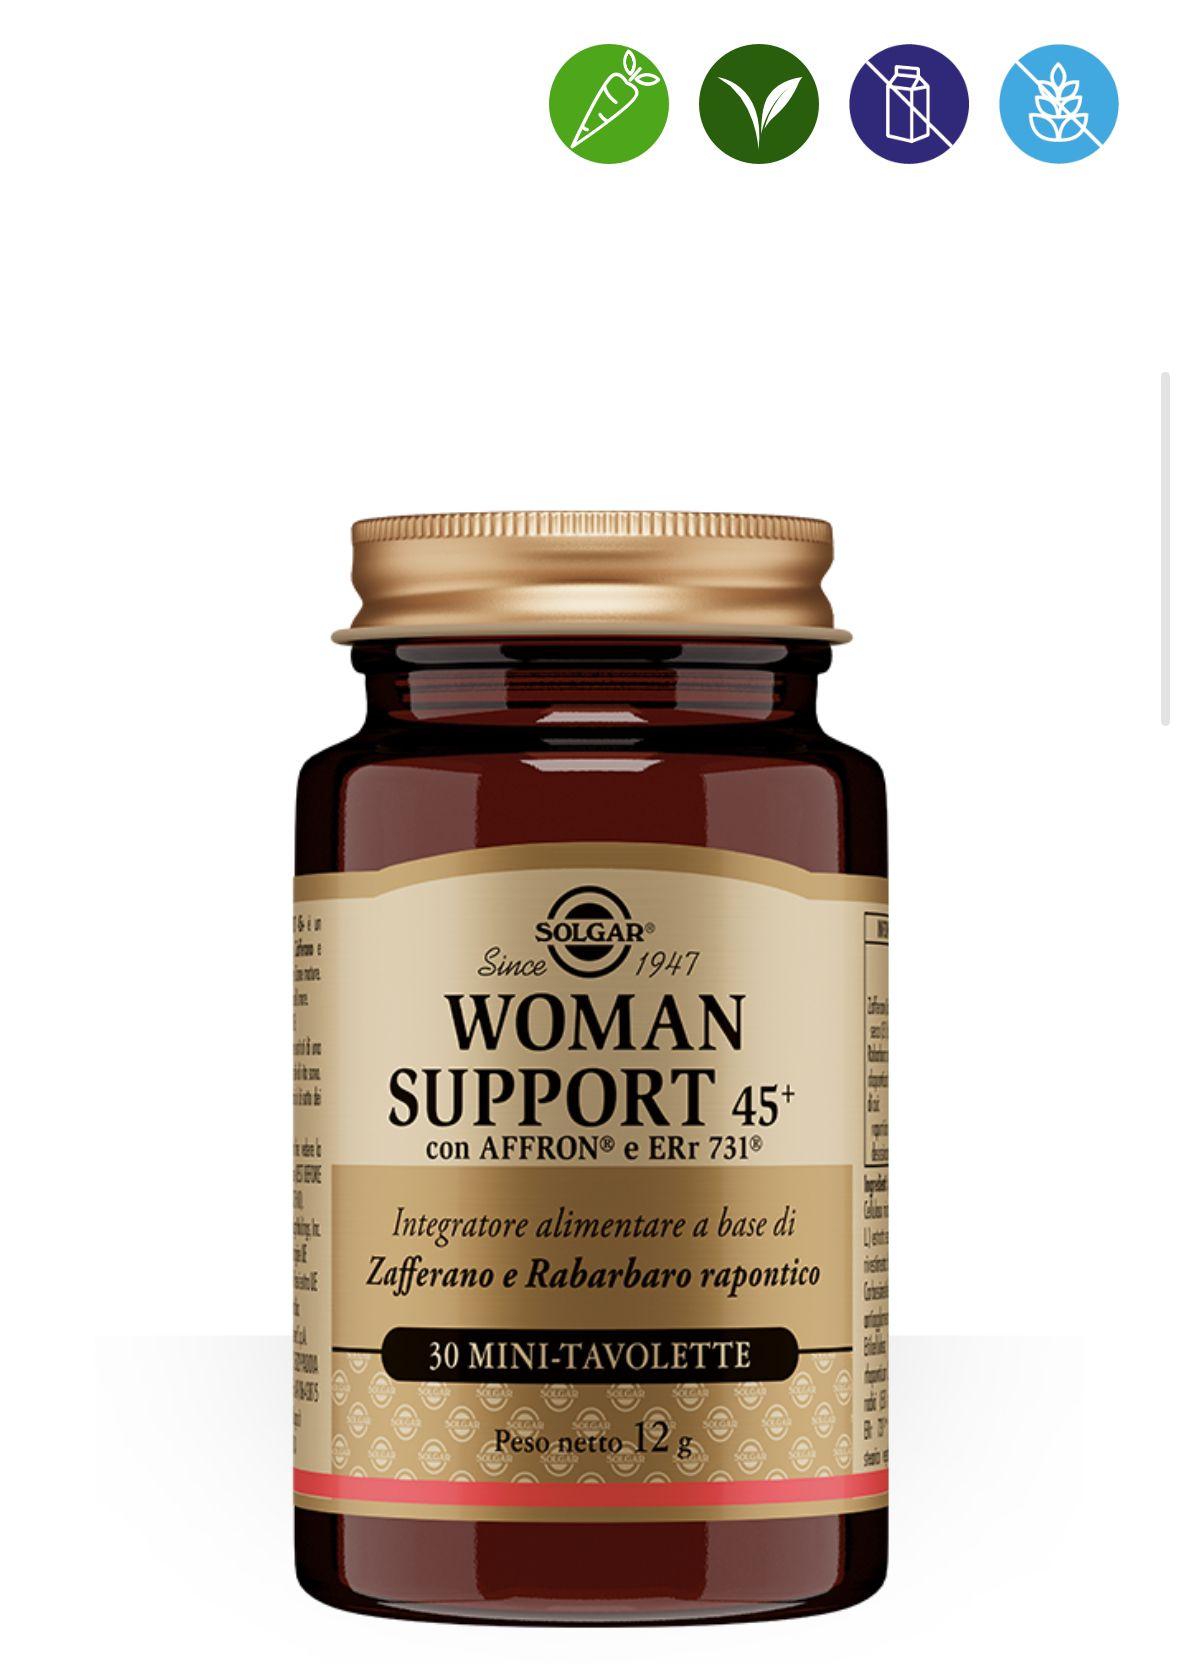 WOMAN SUPPORT 45+